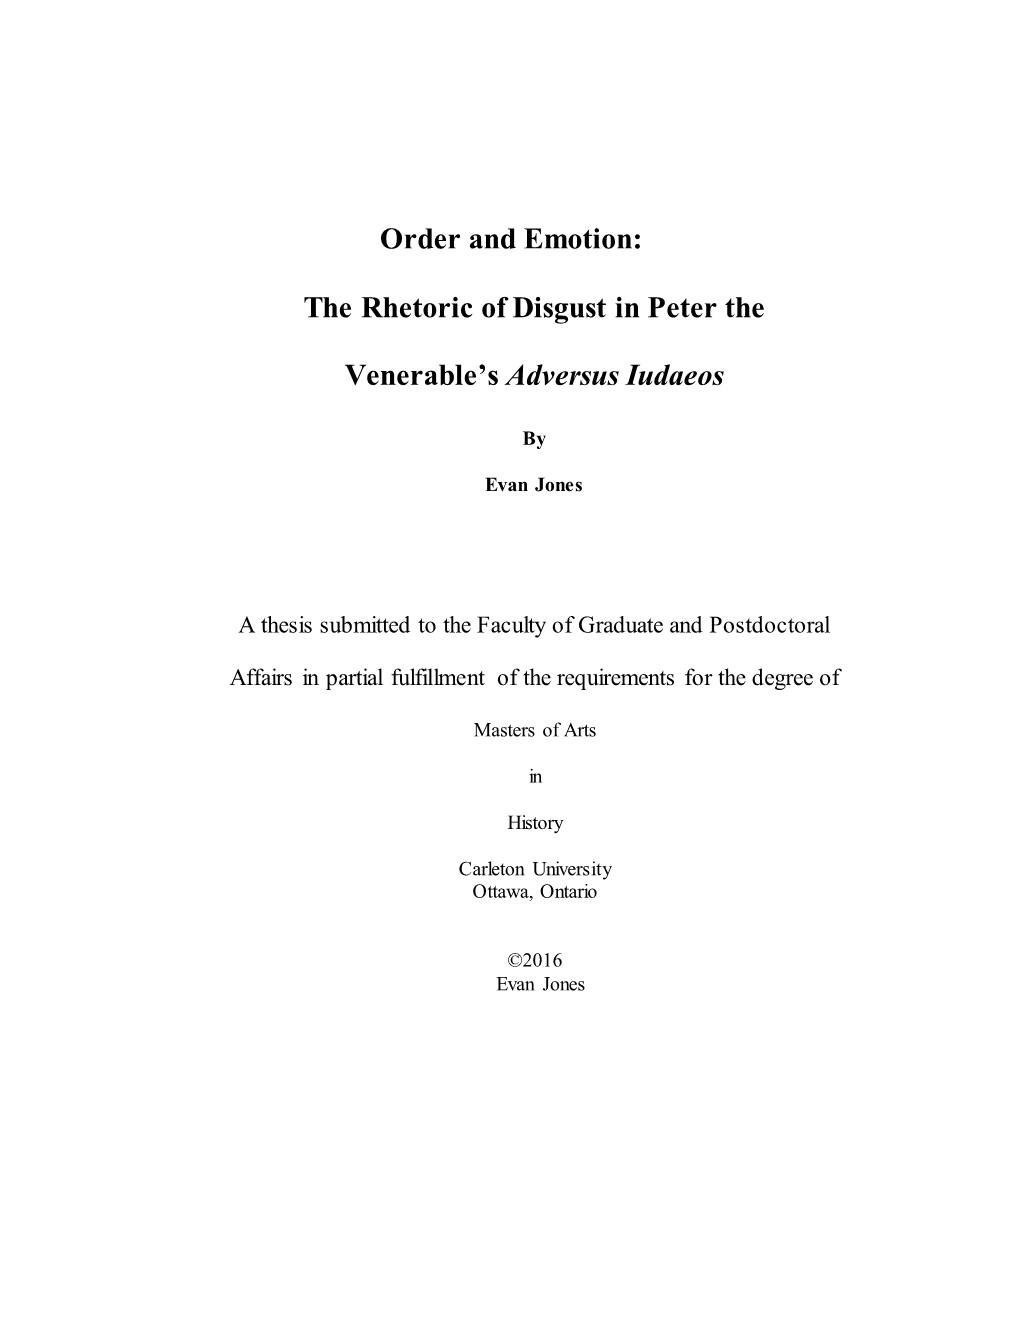 Order and Emotion: the Rhetoric of Disgust in Peter the Venerable's